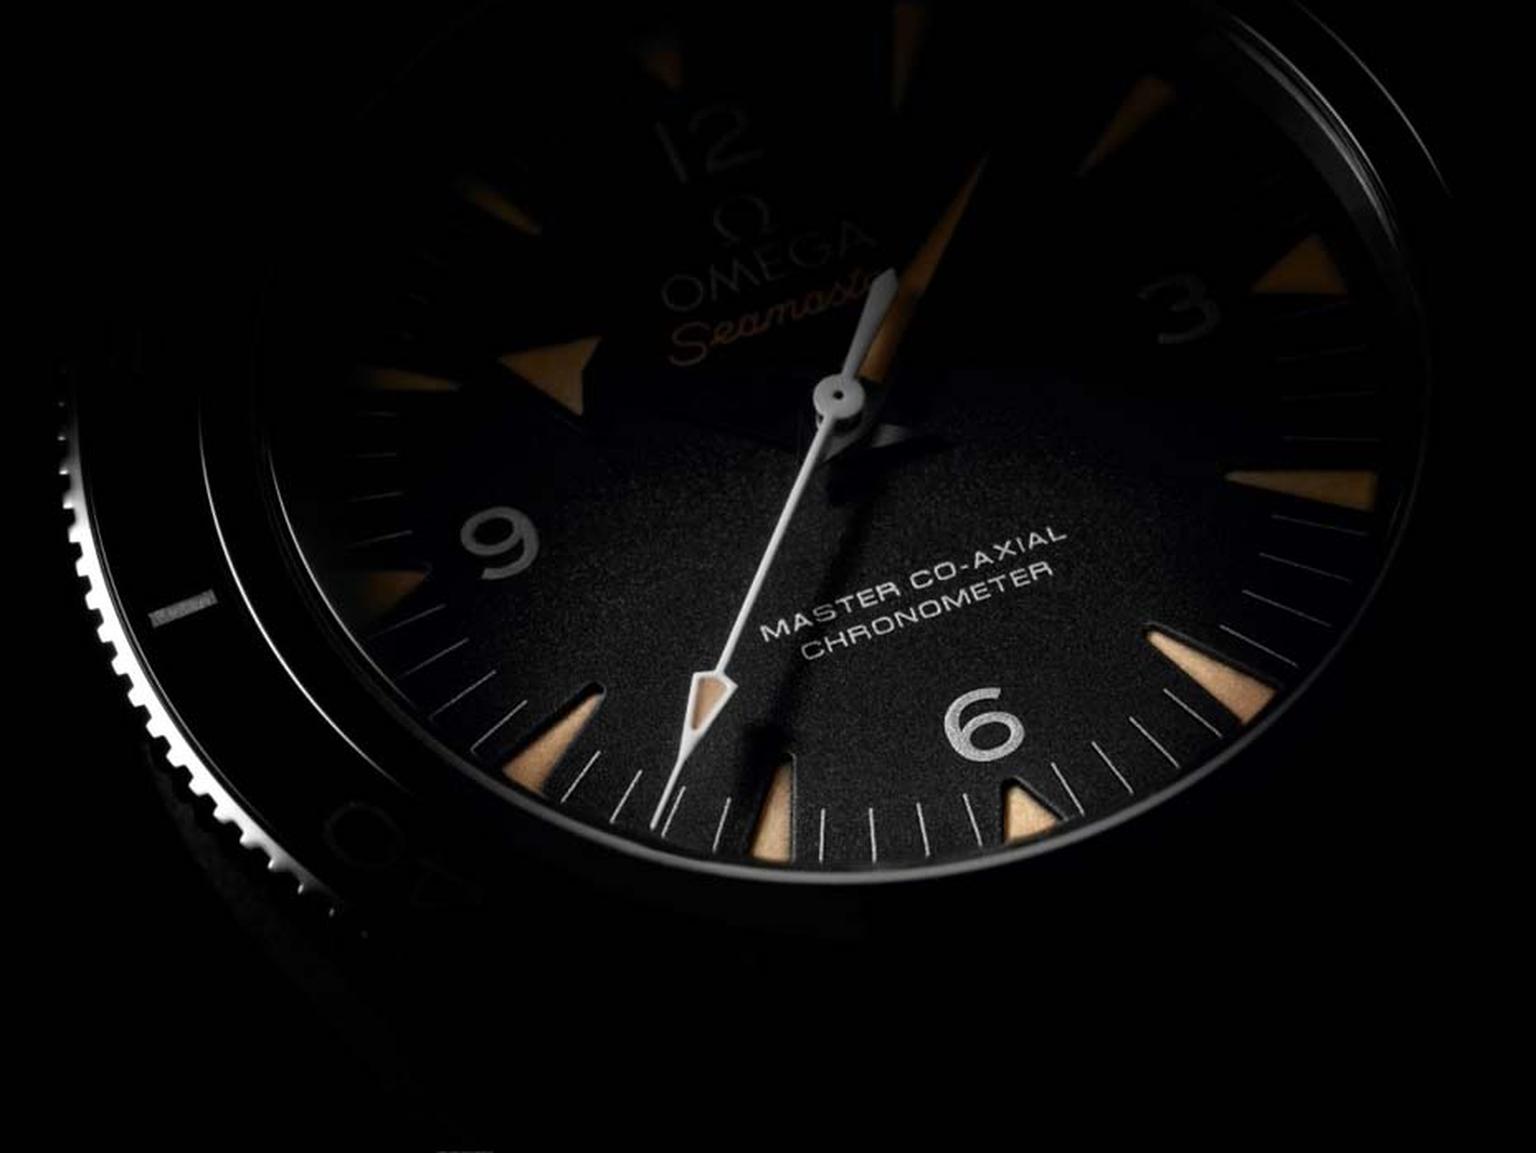 The Omega Seamaster 300 Master Co-Axial 41mm watch features a black sandblasted dial which offsets the beige vintage SuperLumiNova hour markers.